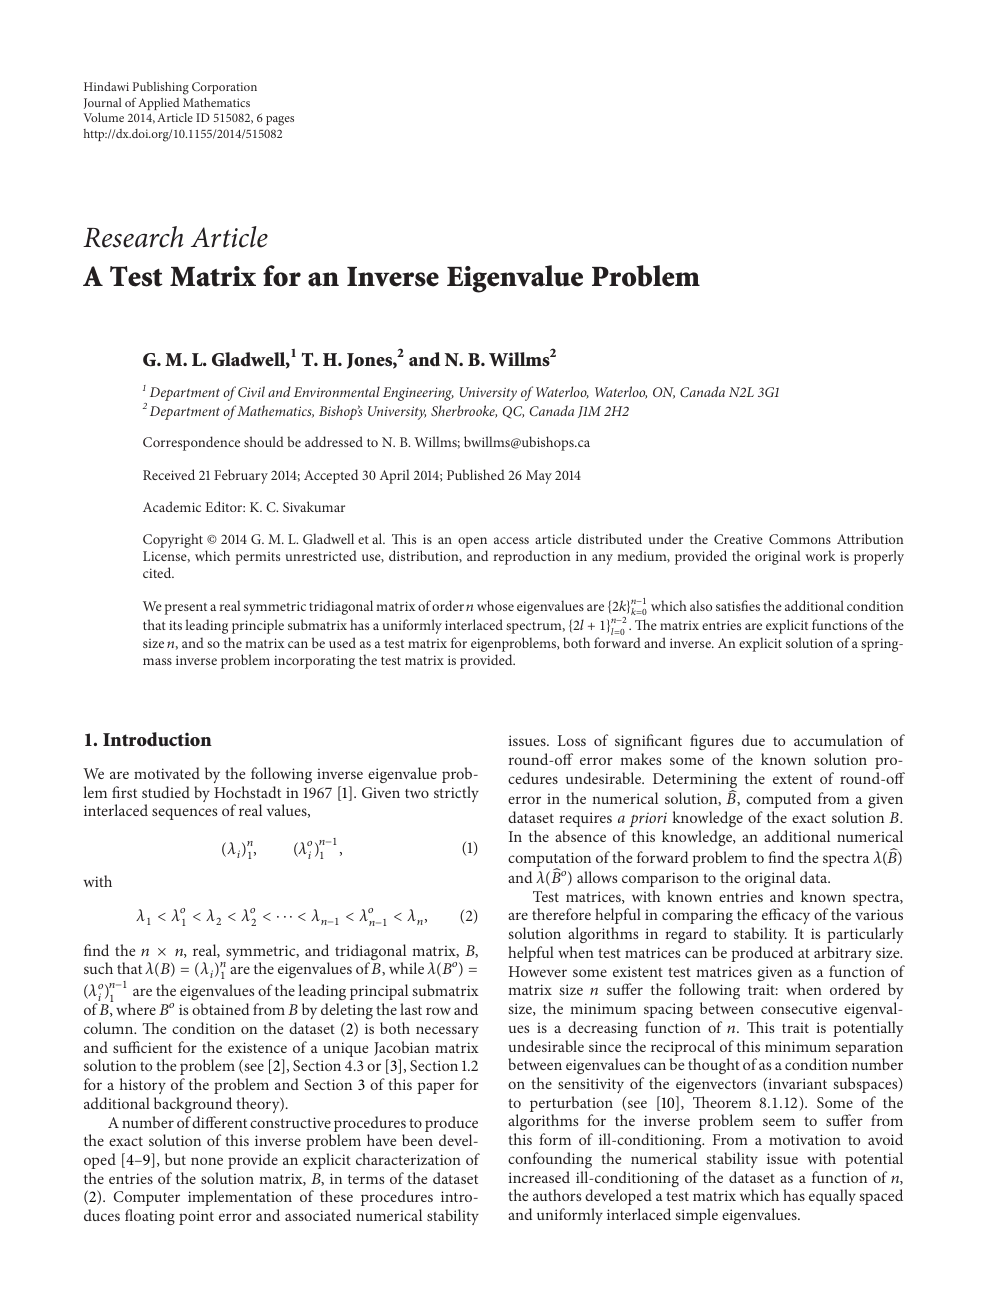 A Test Matrix For An Inverse Eigenvalue Problem Topic Of Research Paper In Mathematics Download Scholarly Article Pdf And Read For Free On Cyberleninka Open Science Hub